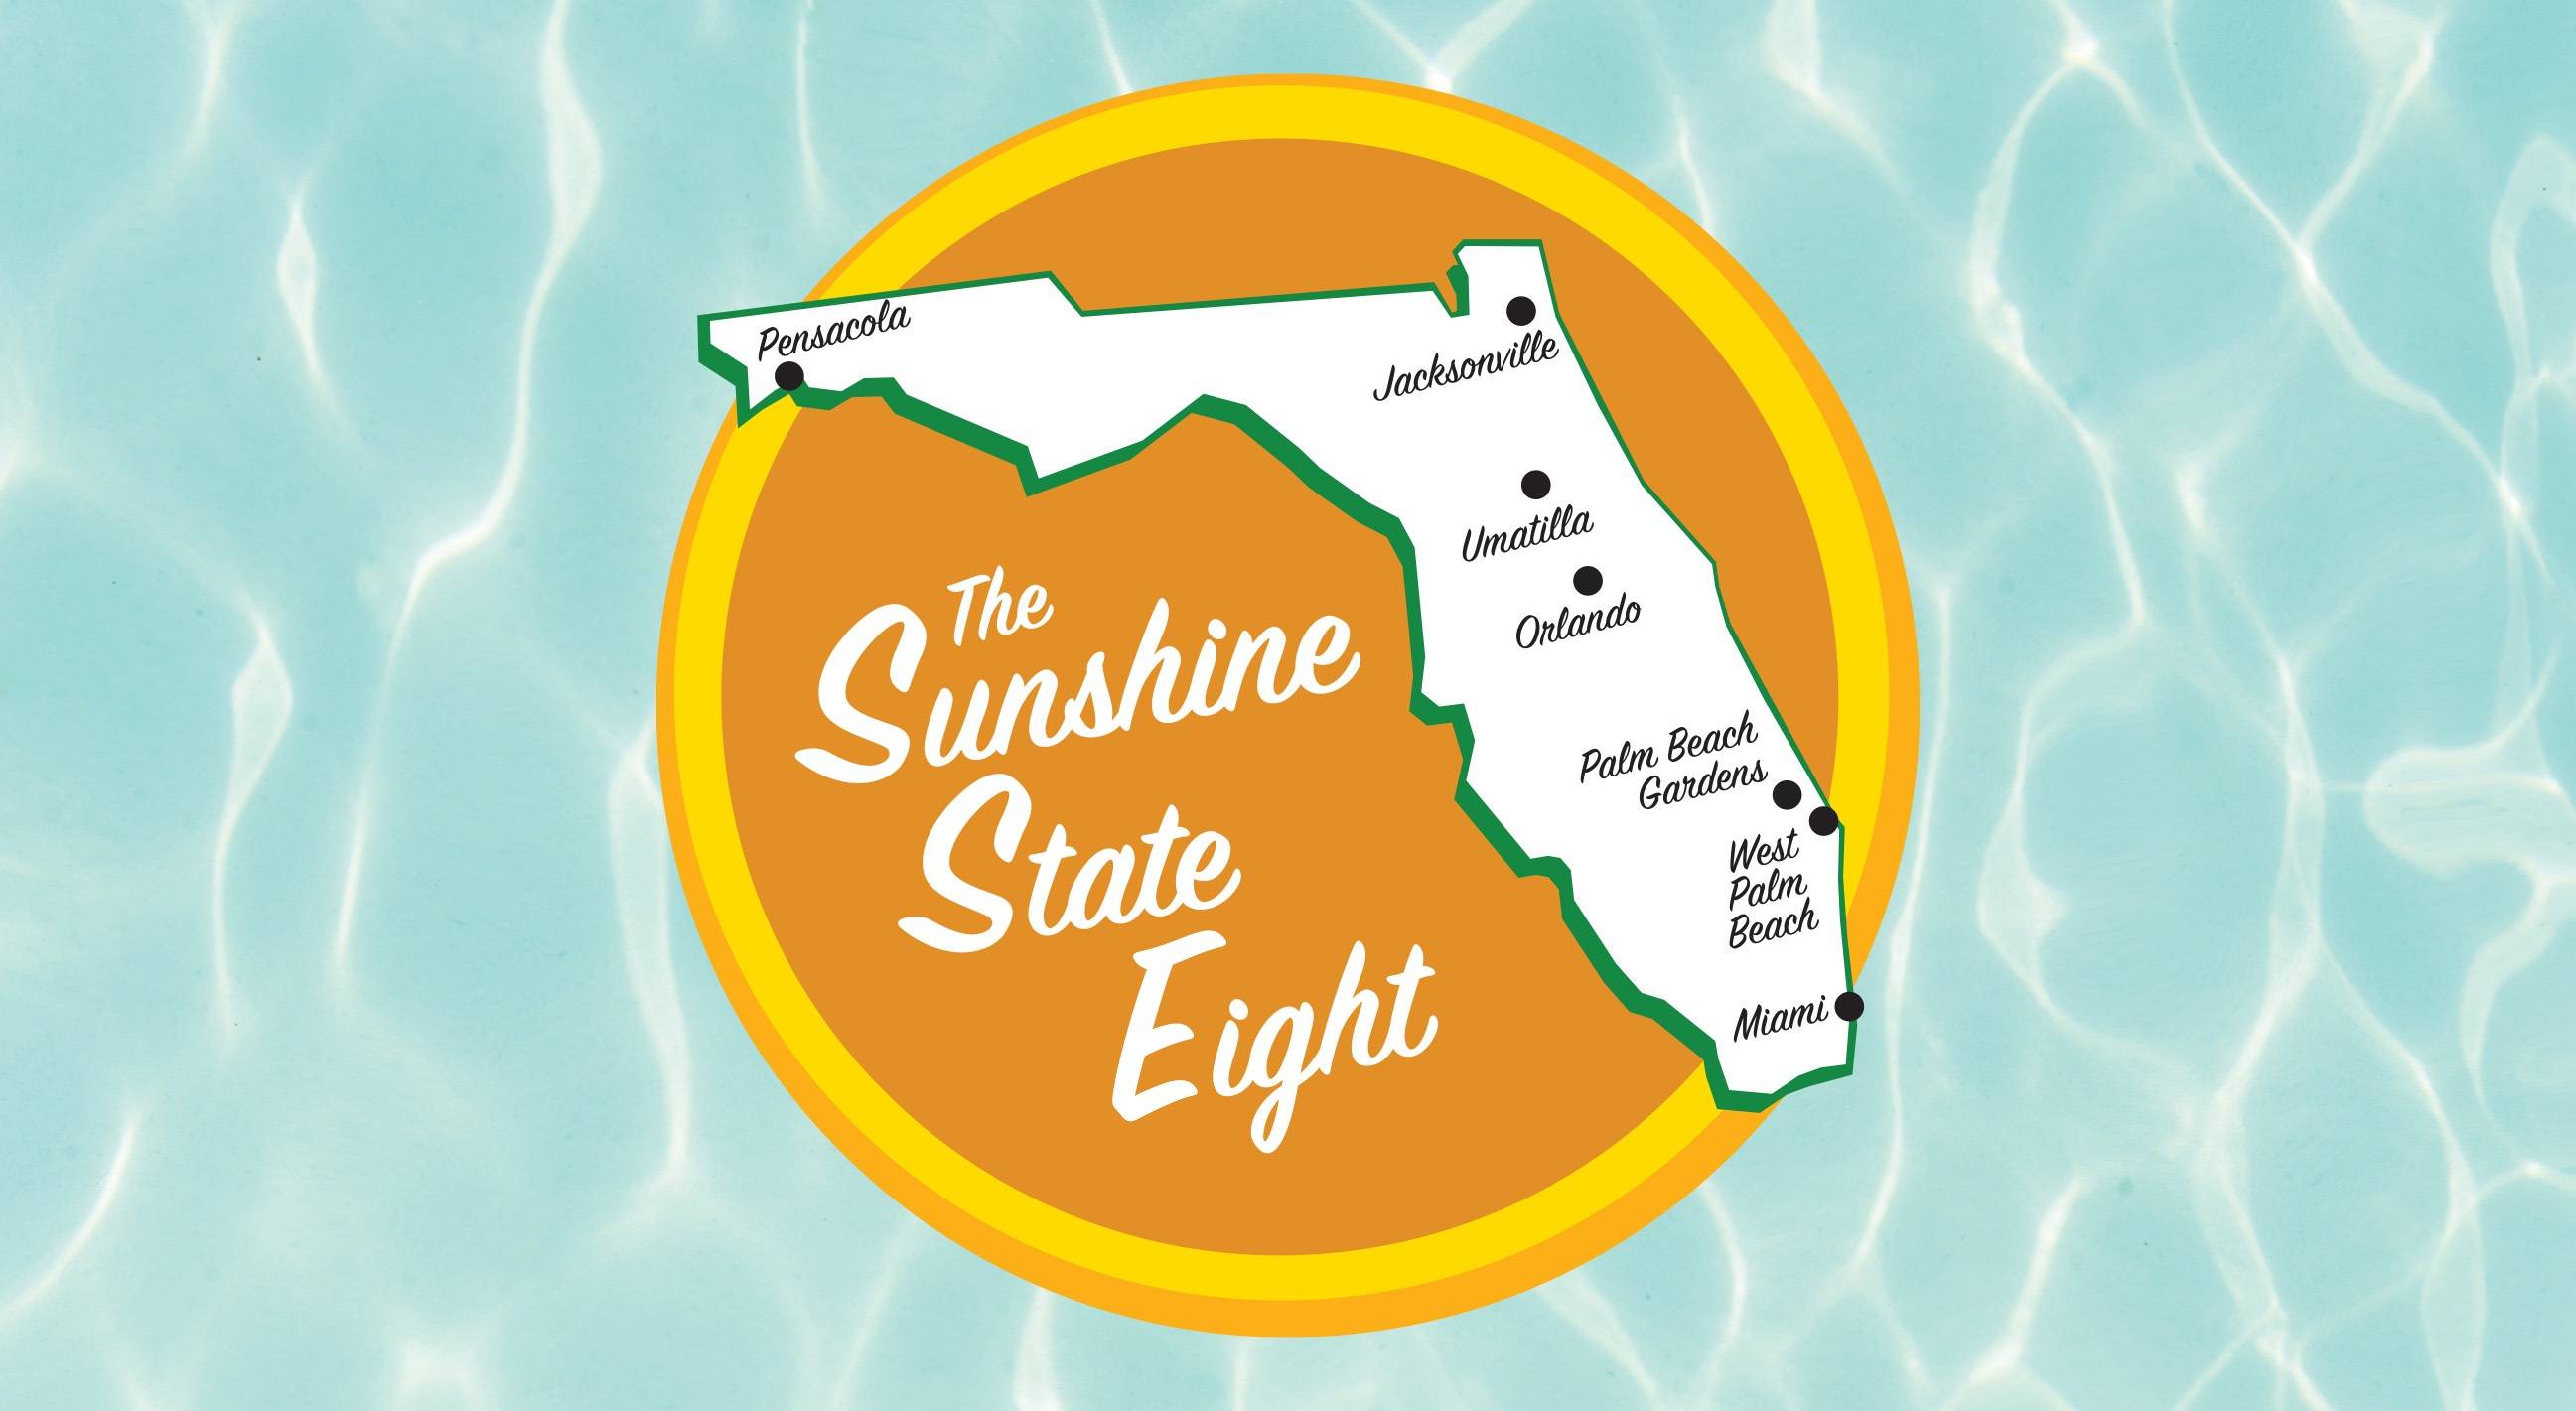 graphic of state of florida with 7 locations pinpointed